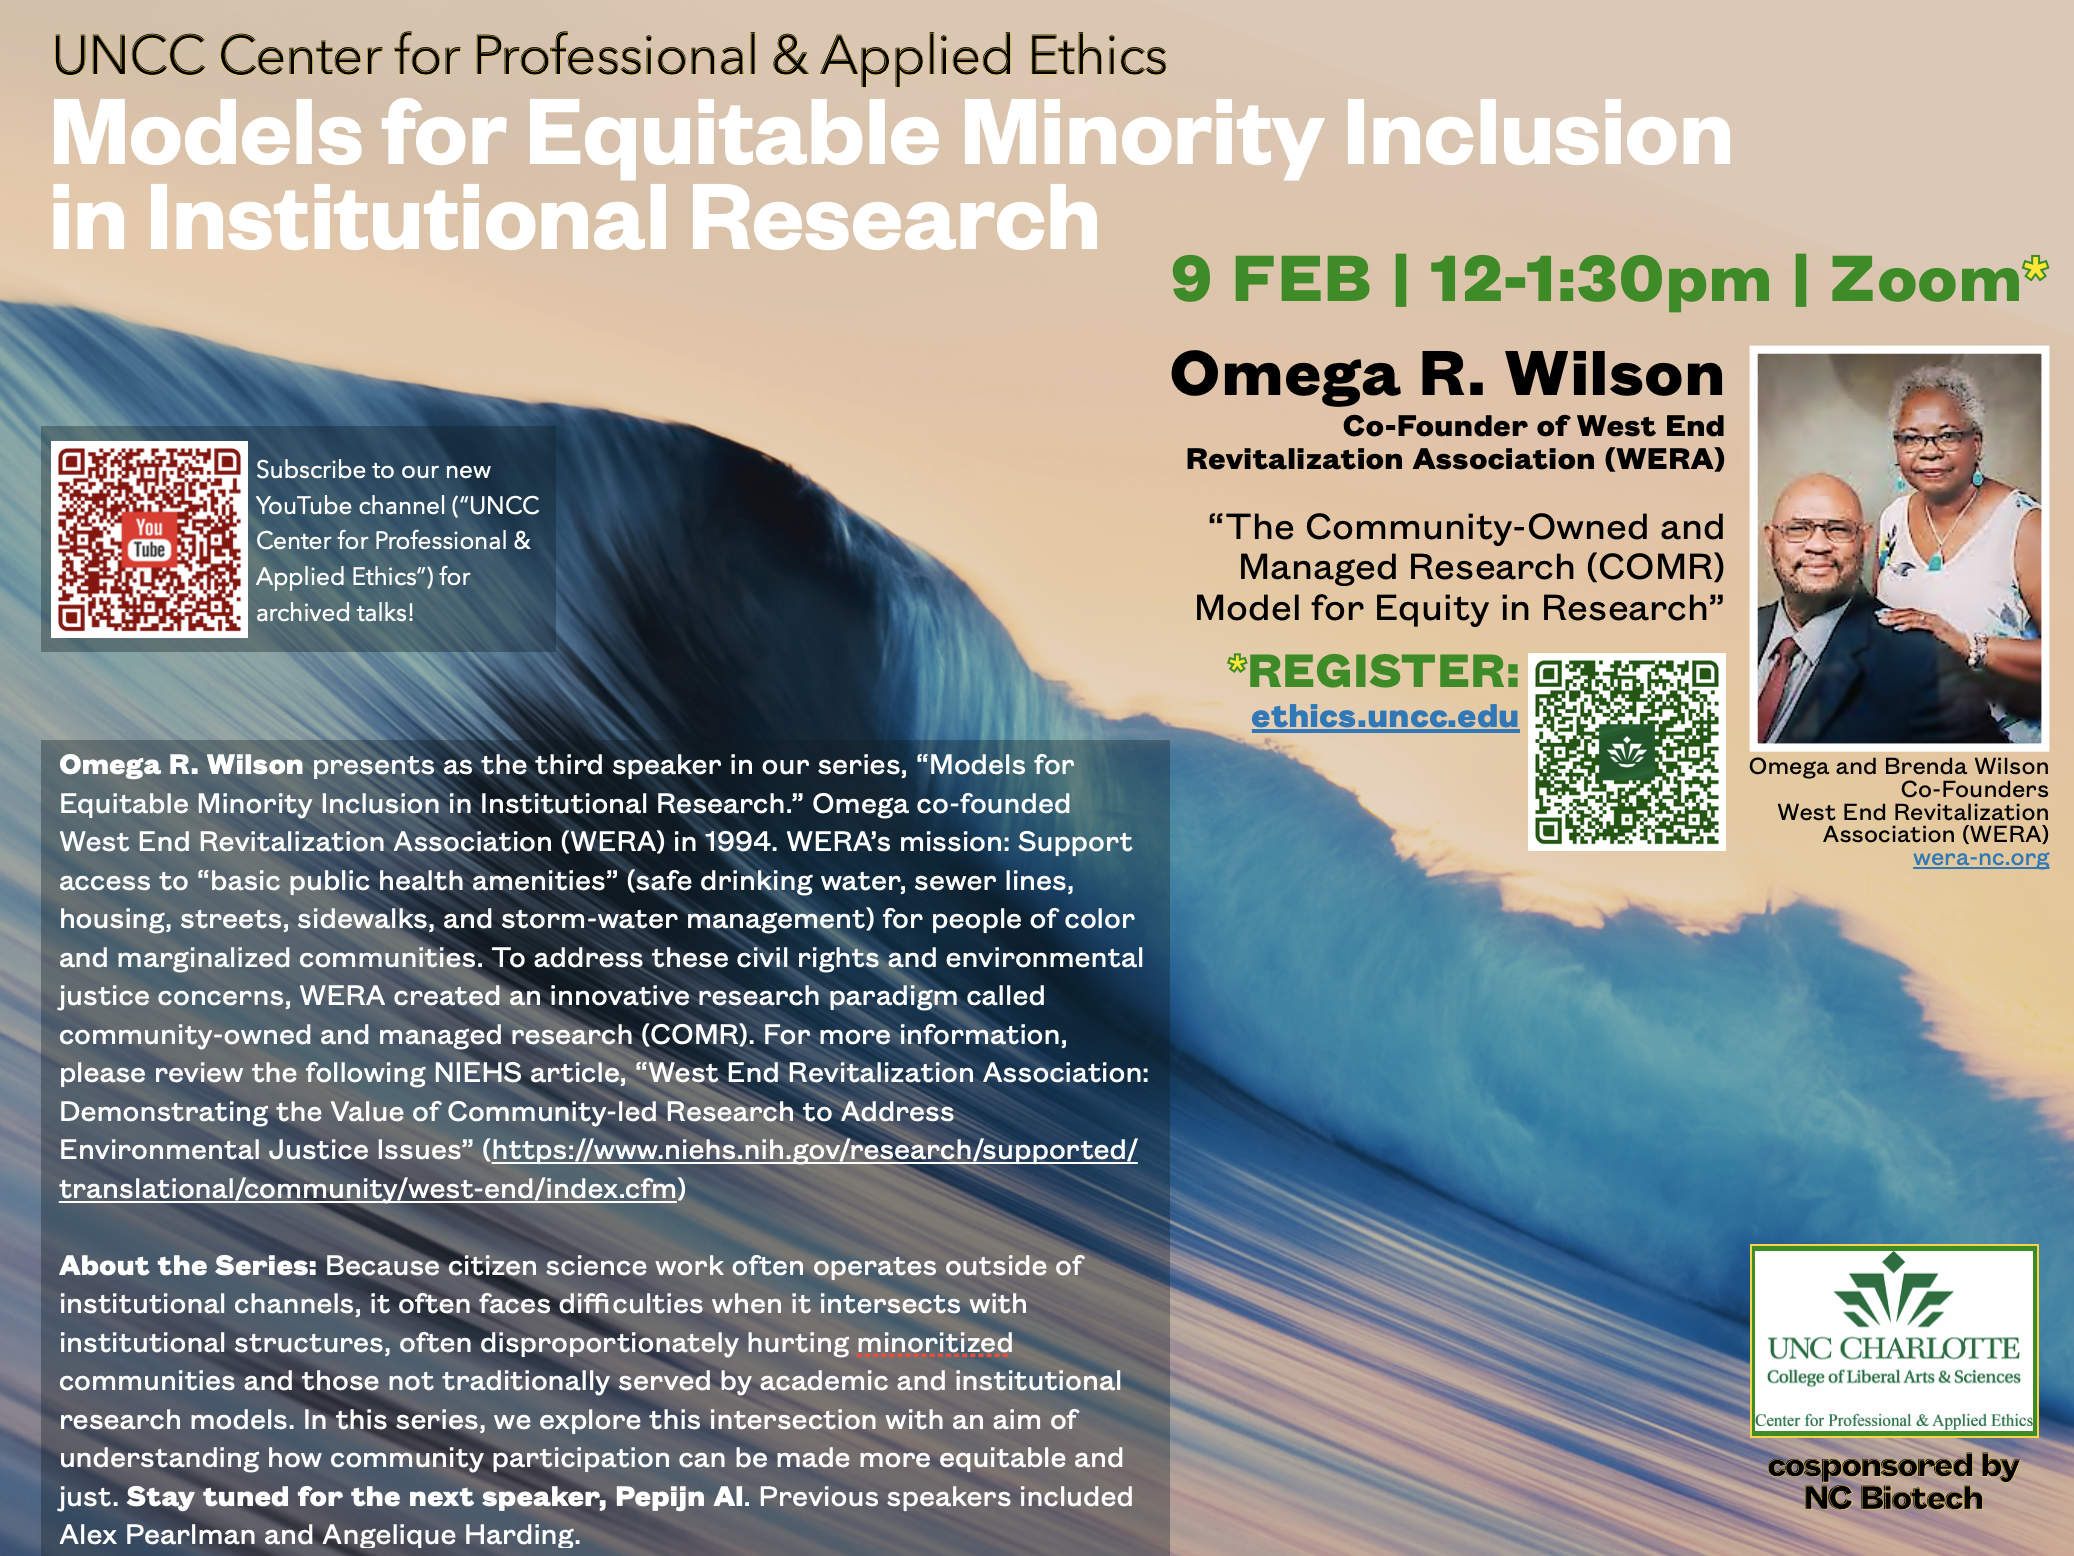 Omega R. Wilson, "The Community-Owned and Managed Research (COMR) Model for Equity in Research"